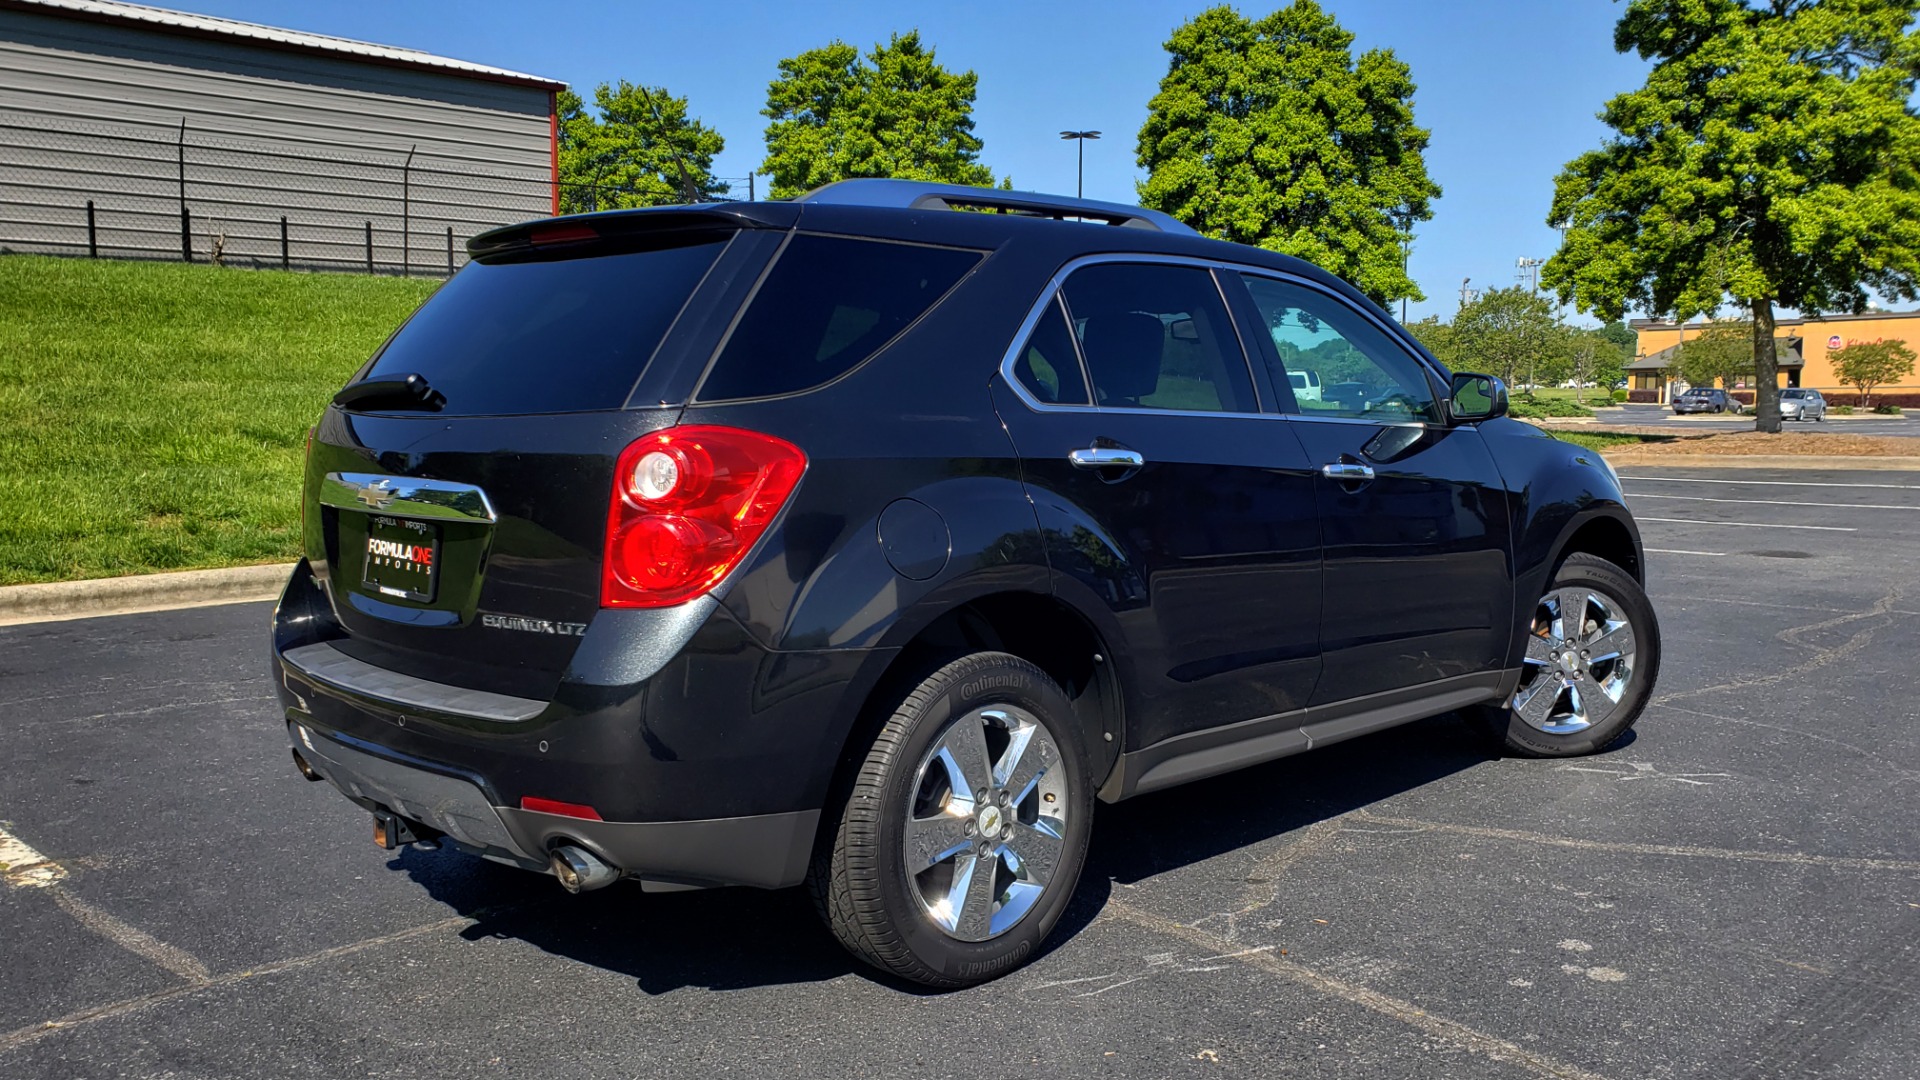 Used 2012 Chevrolet EQUINOX LTZ / FWD / 3.0L V6 / NAV / SUNROOF / PIONEER SND / REARVIEW for sale Sold at Formula Imports in Charlotte NC 28227 6